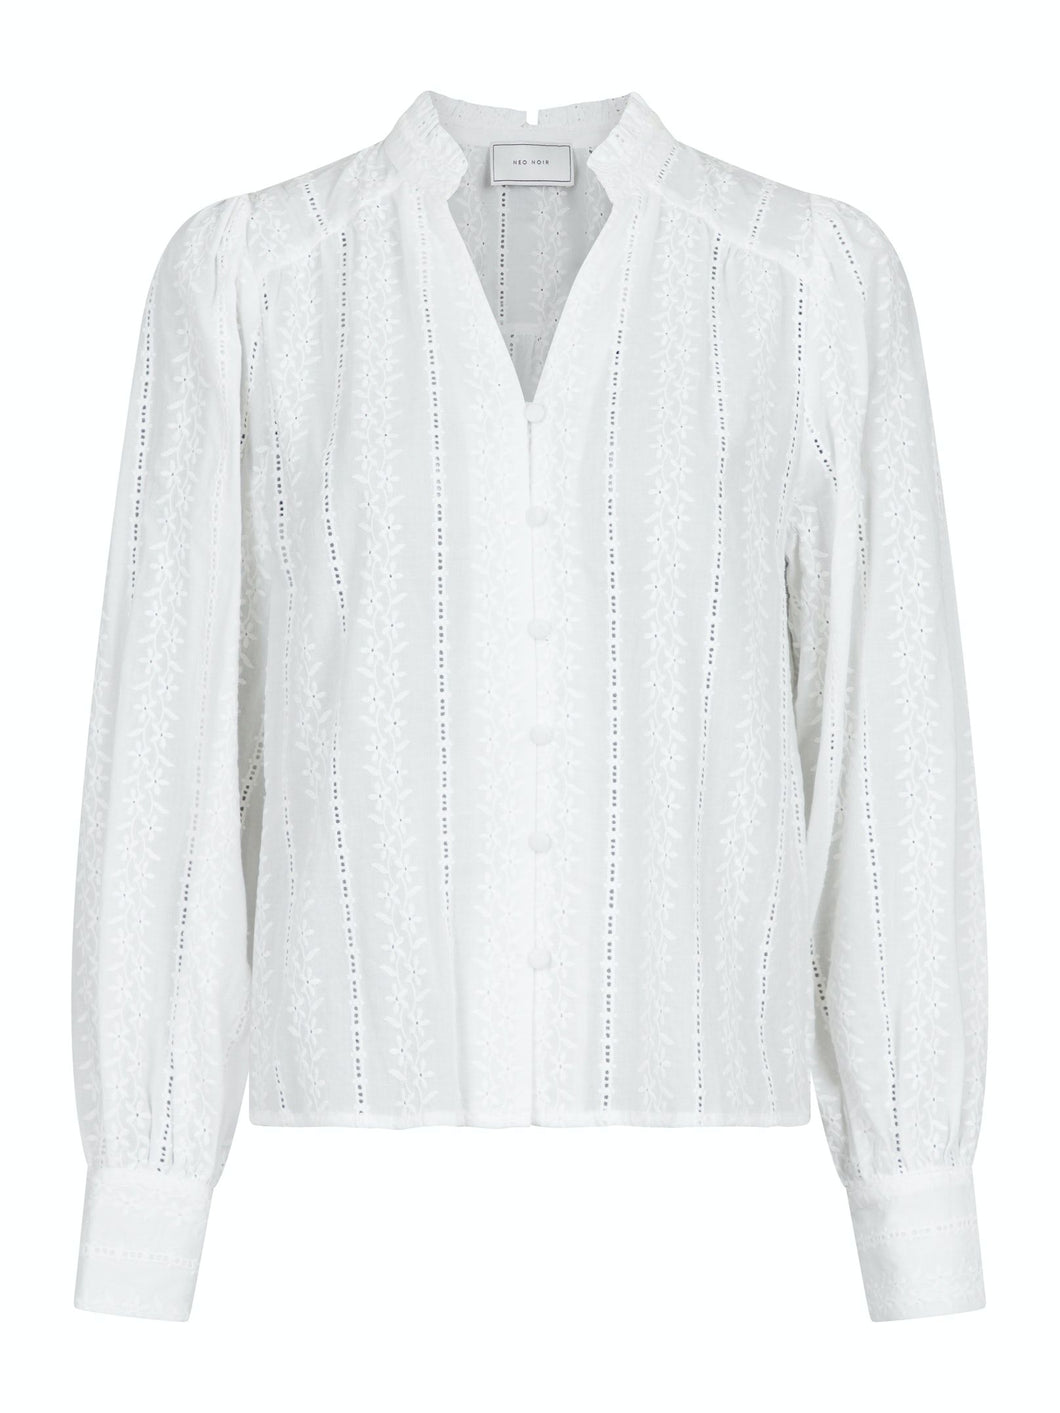 Neo Noir - Massima Embroidery Blouse